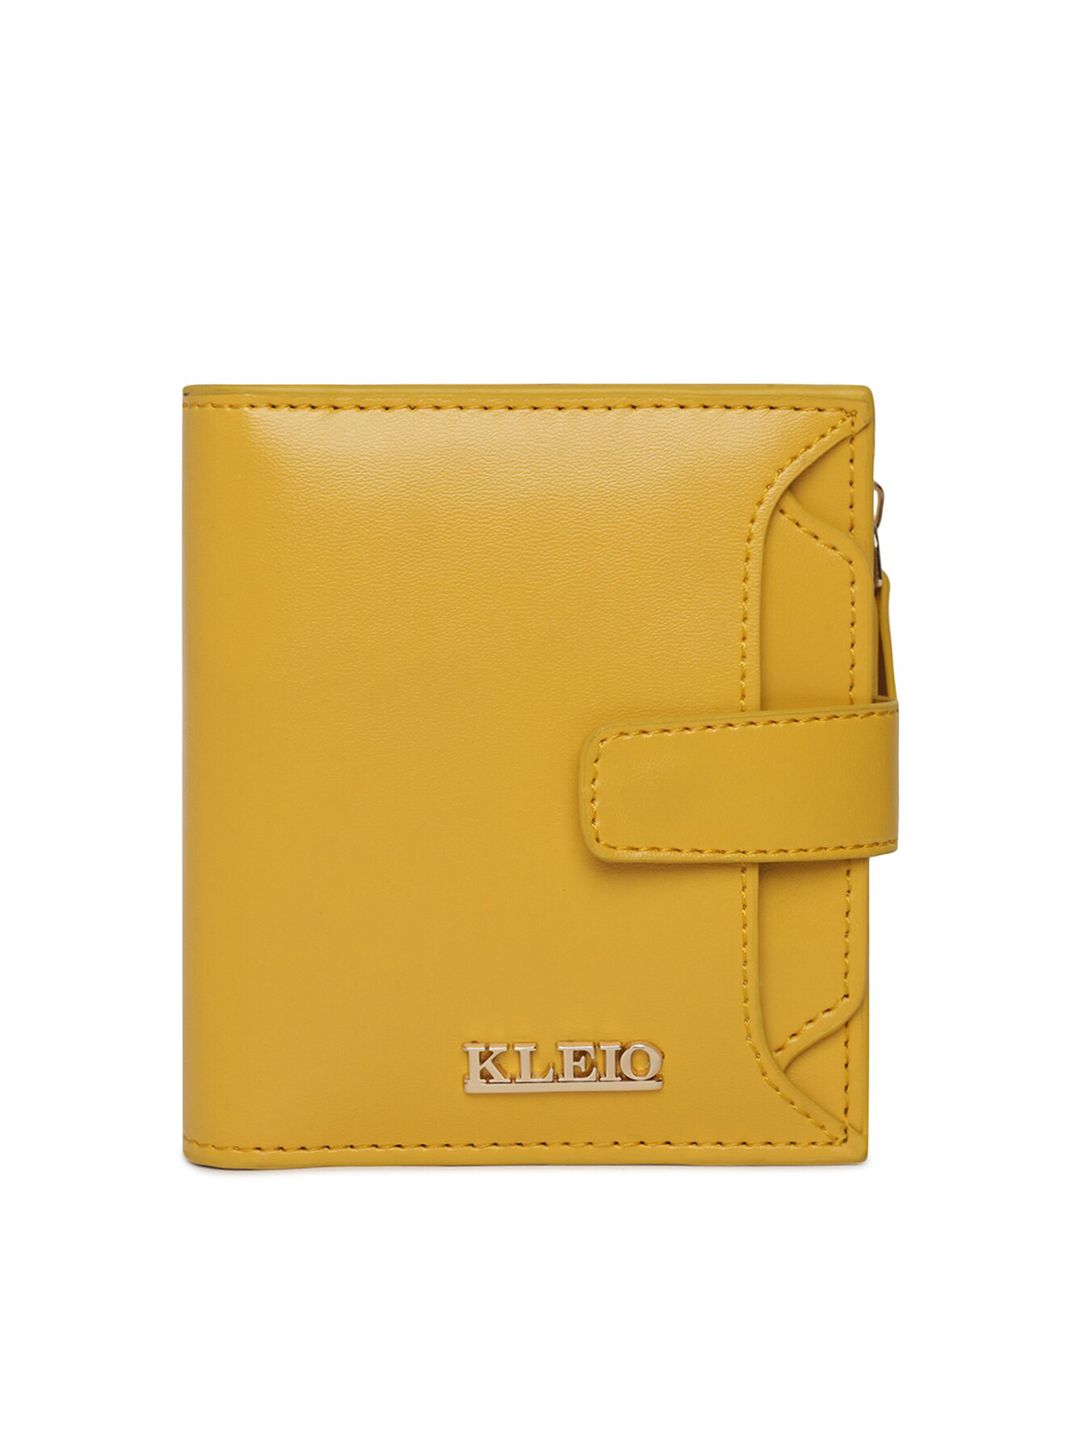 KLEIO Women Yellow Solid Synthetic Leather Zip Around Wallet Price in India